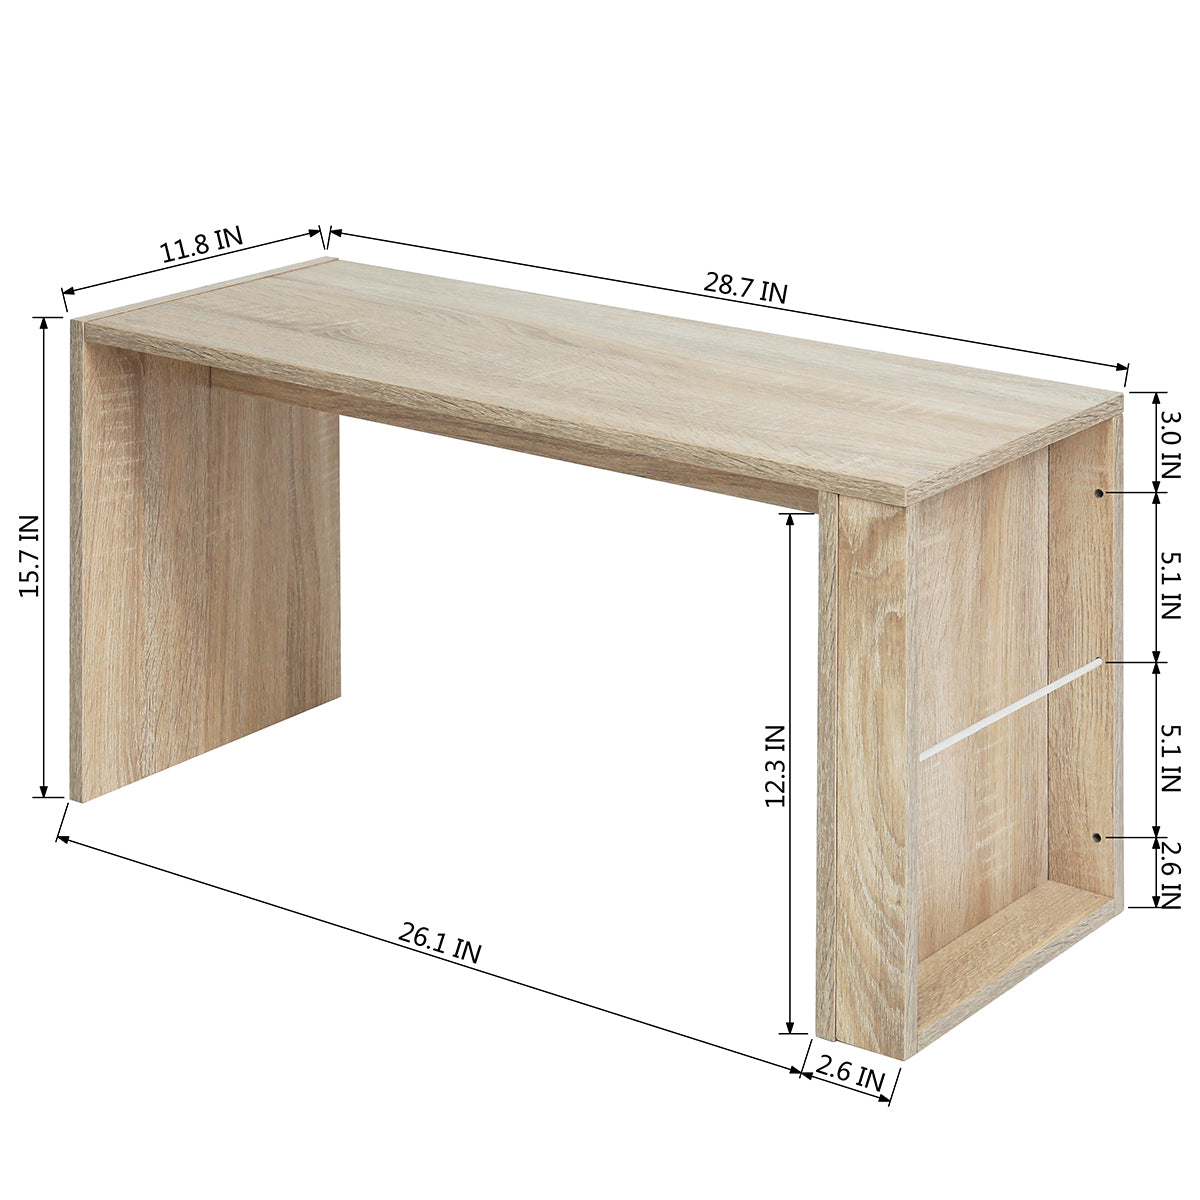 Full wooden End table/Side table/Coffee table